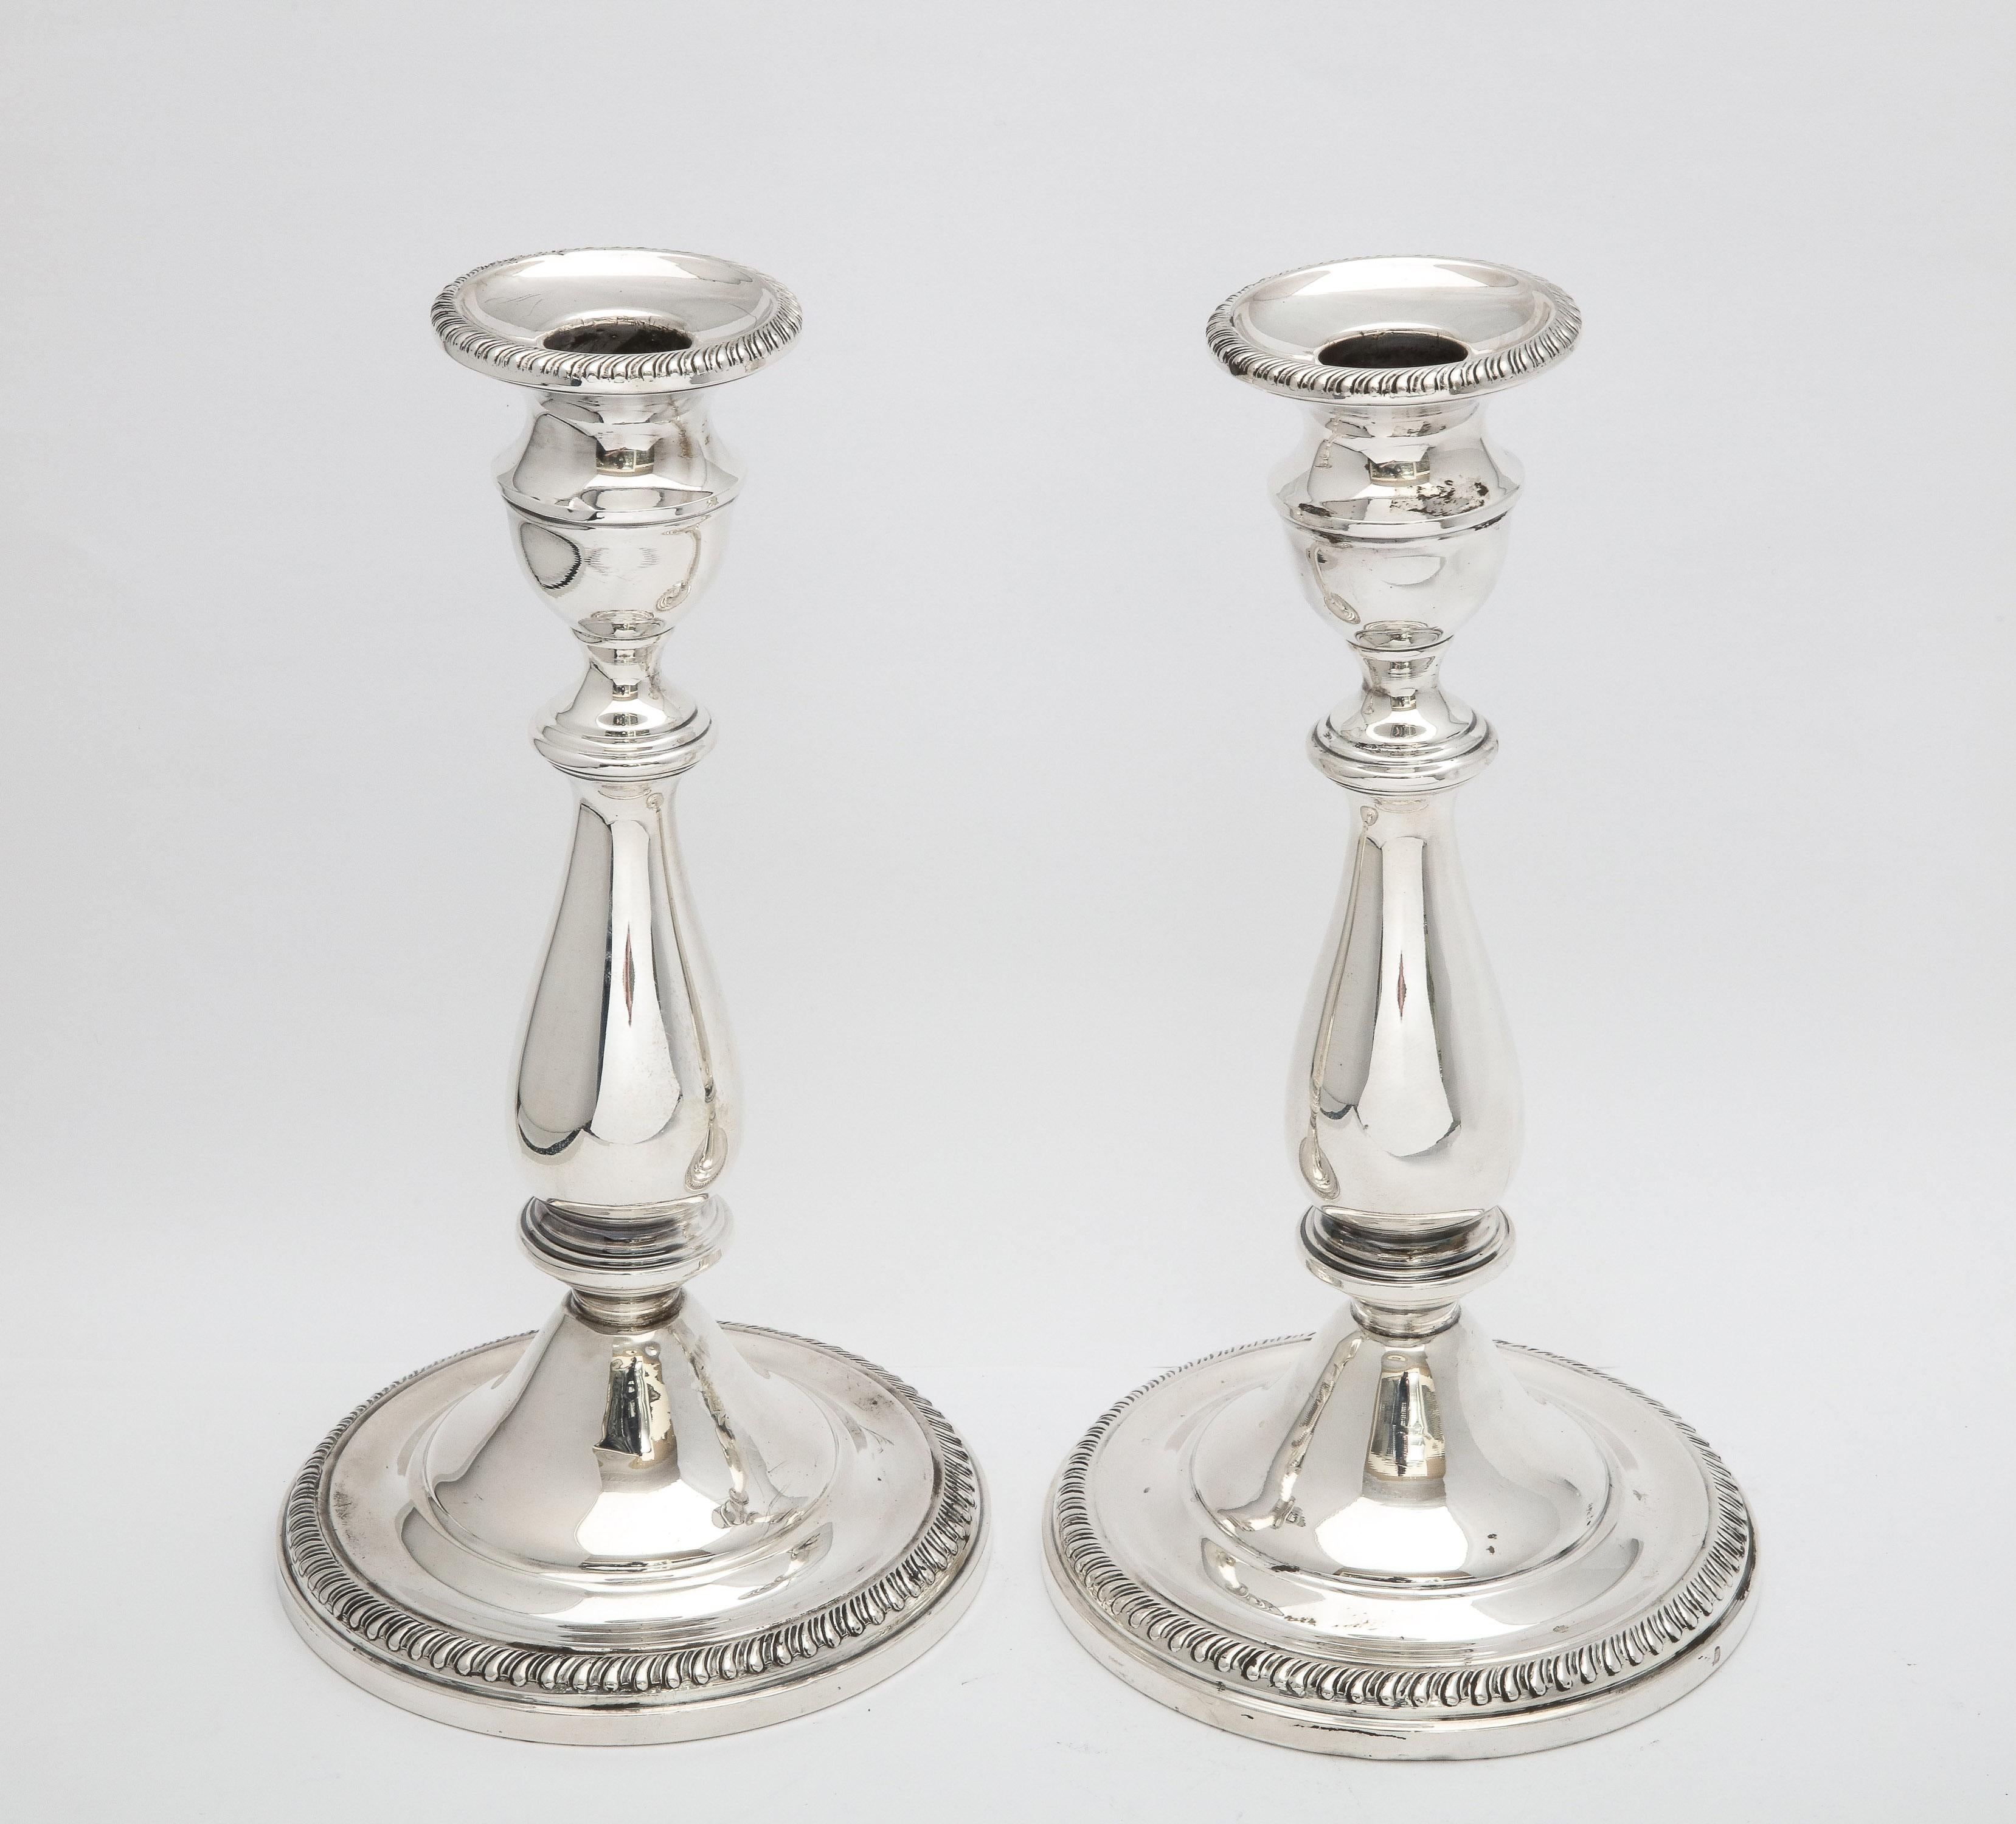 Edwardian style, sterling silver candlesticks, The Mueck-Carey Co., New York, Ca. 1940's. Each candlestick measures 9 inches high x 4 3/4 inches diameter and each is designed with  a reeded border circling its base and edge of its candle cup.